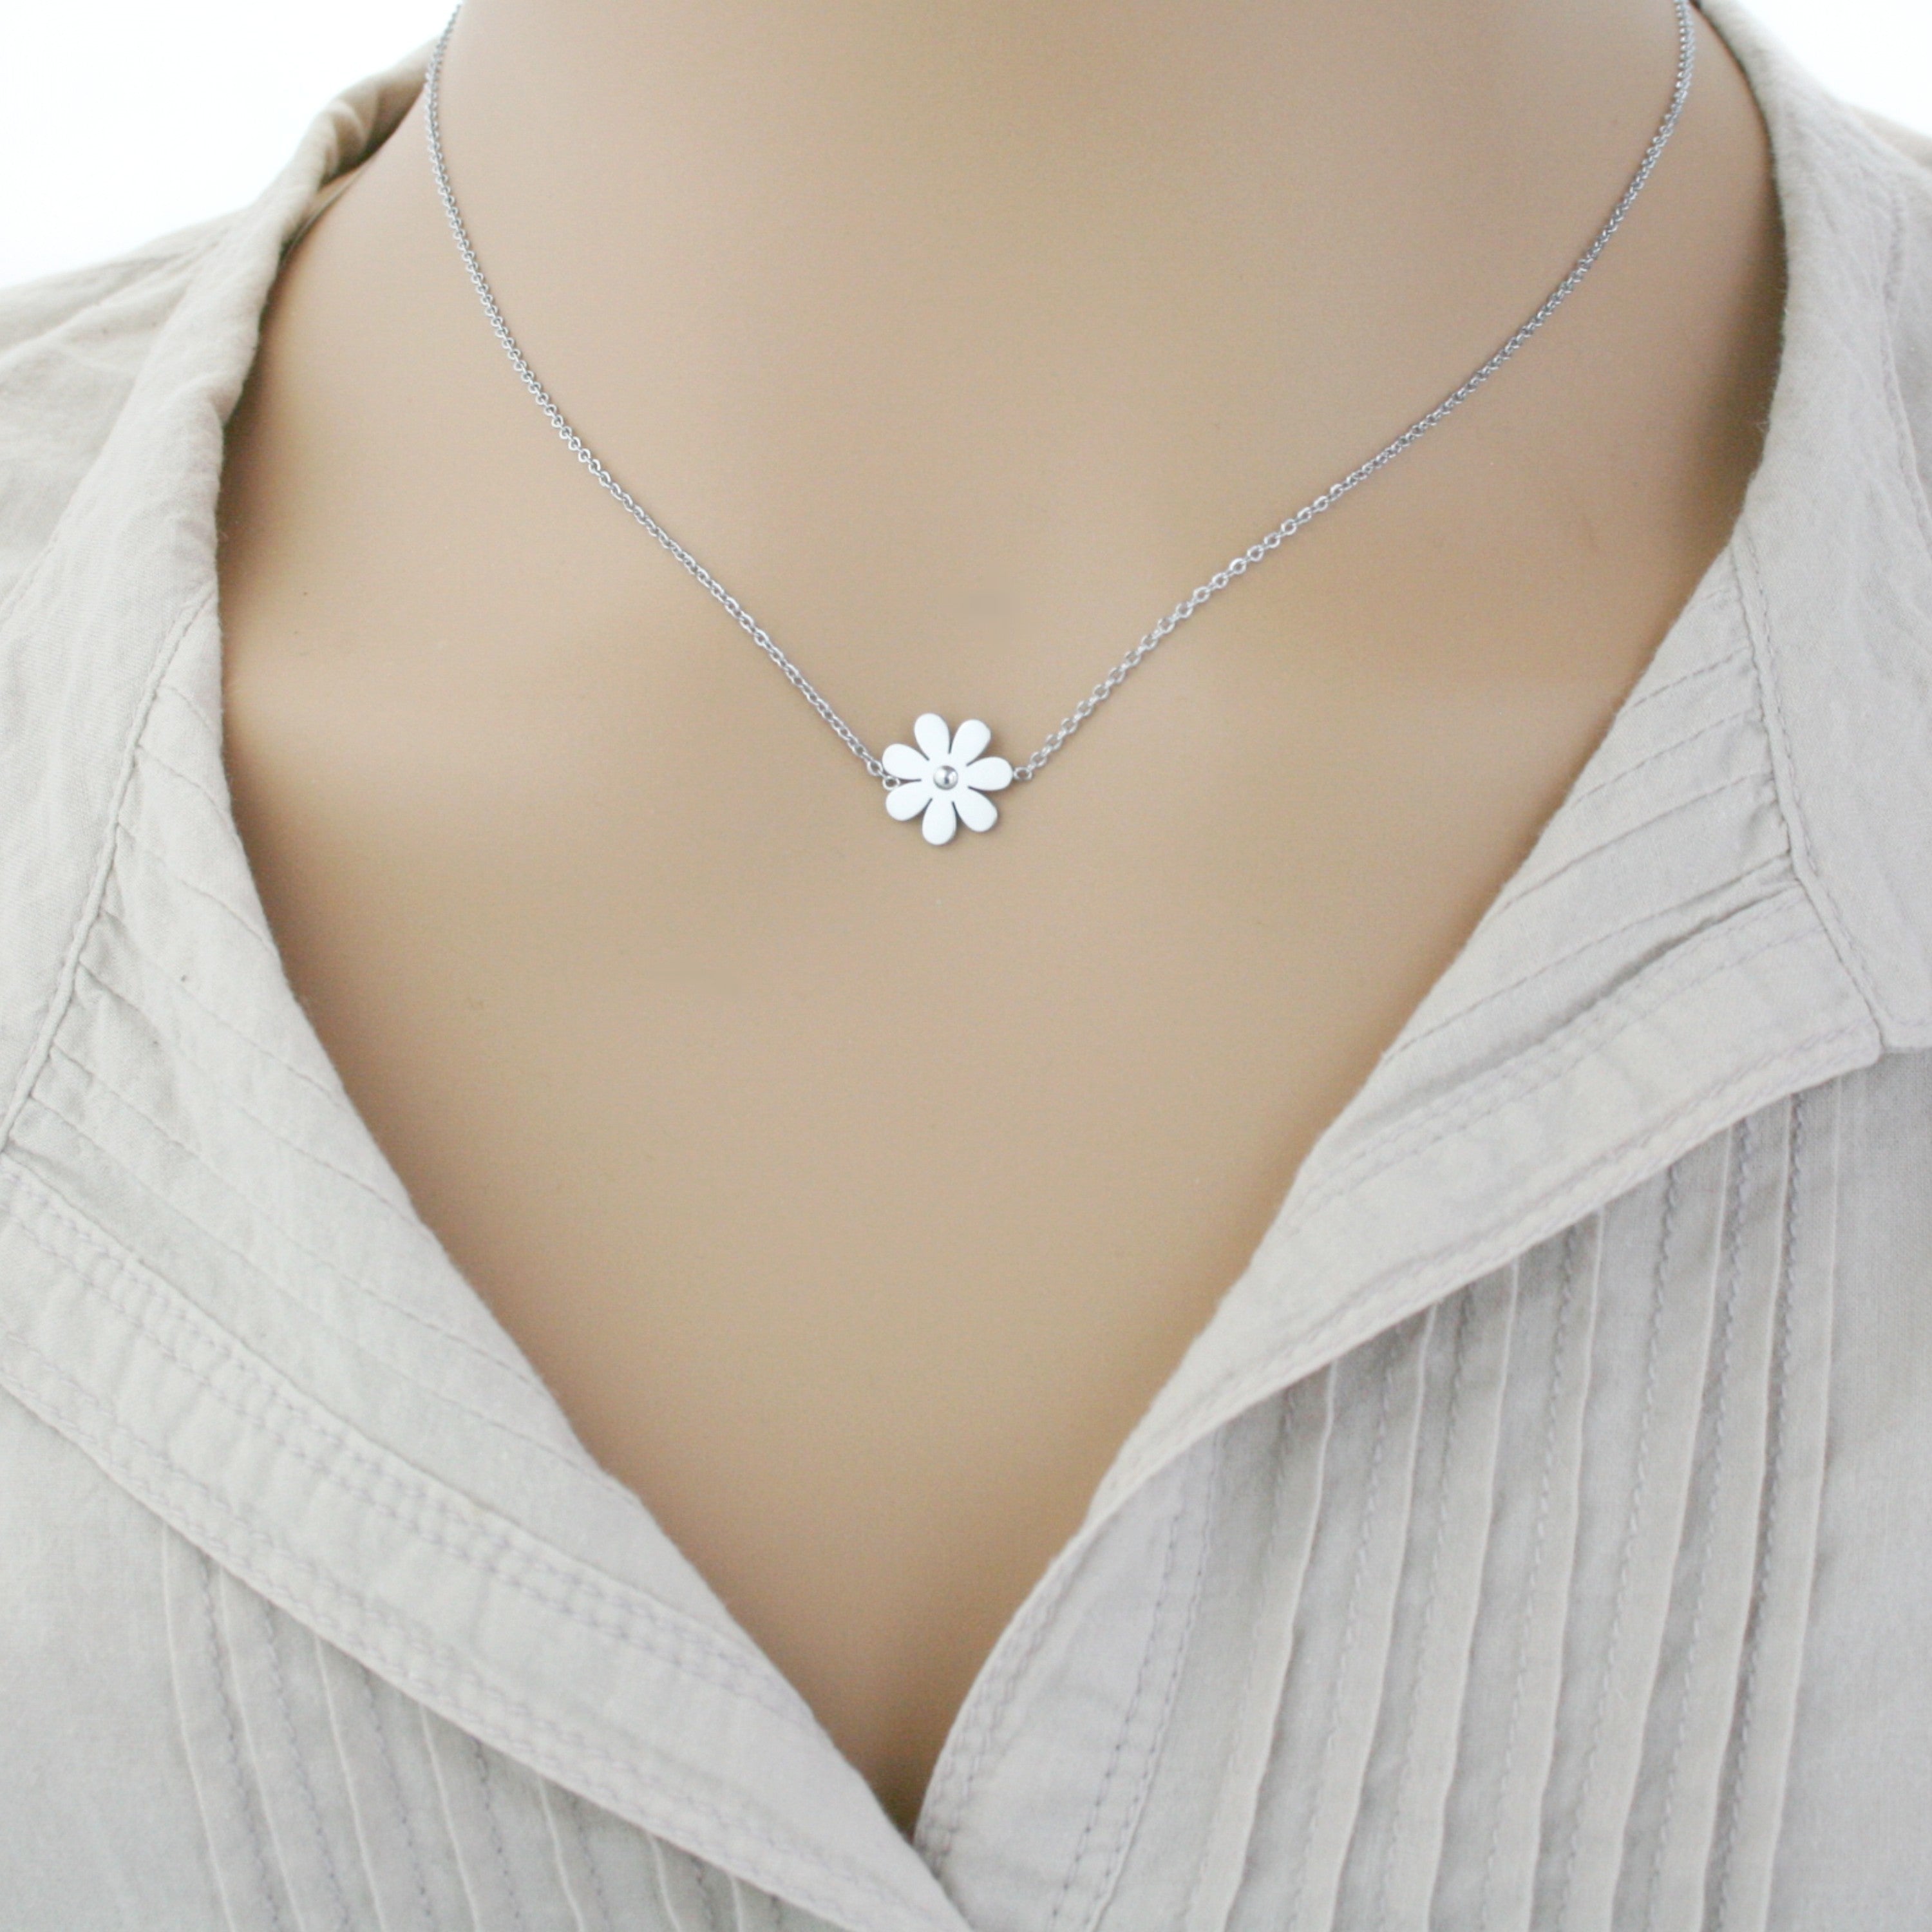 Stainless Steel Daisy Necklace